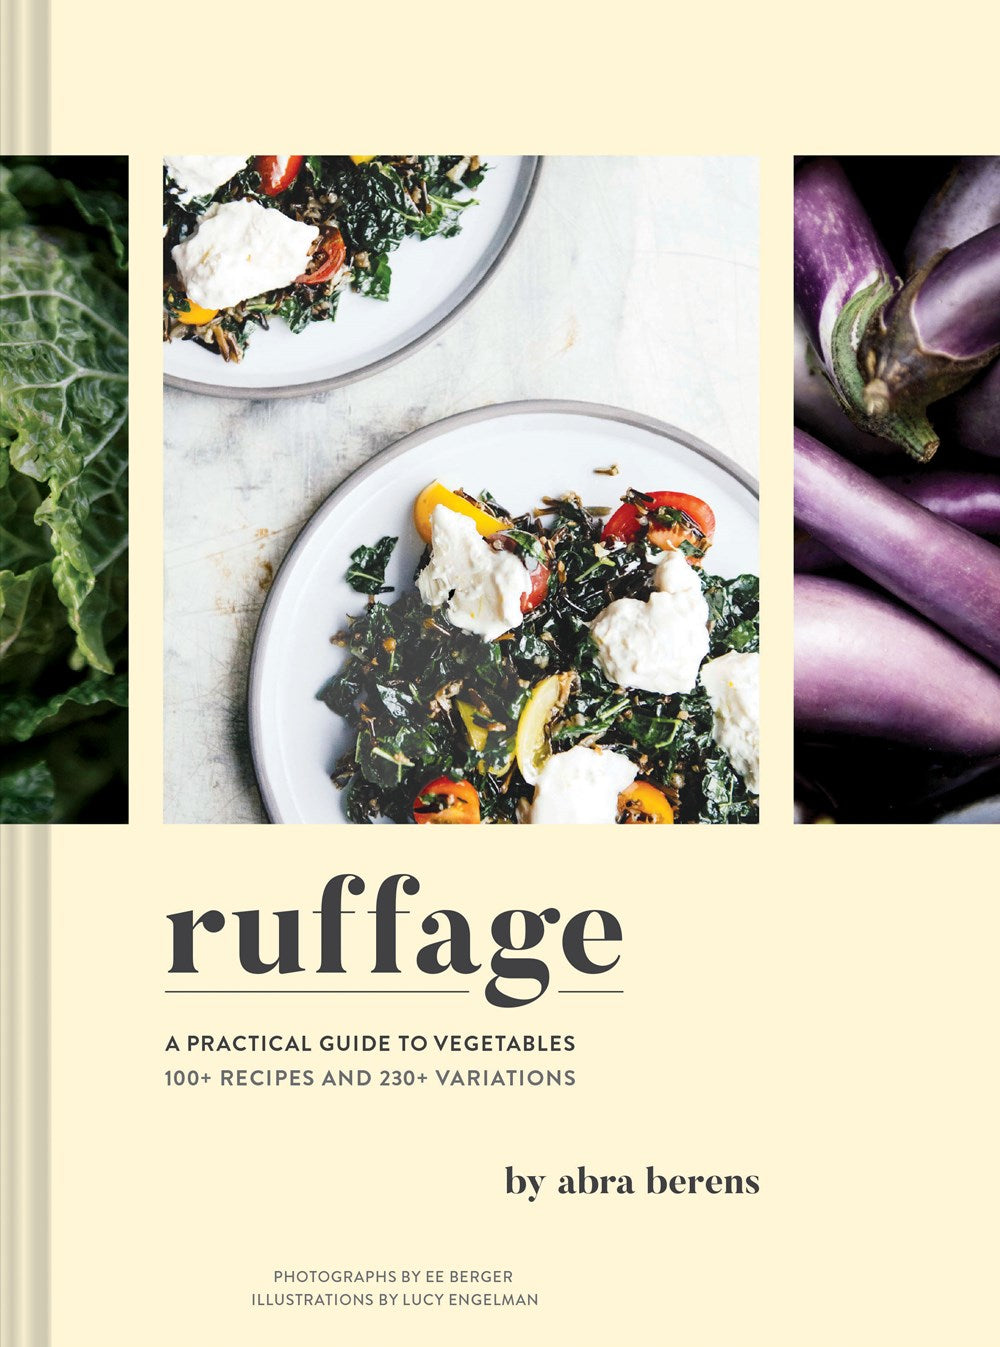 Ruffage: A Practical Guide to Cooking with Vegetables by Abra Berens